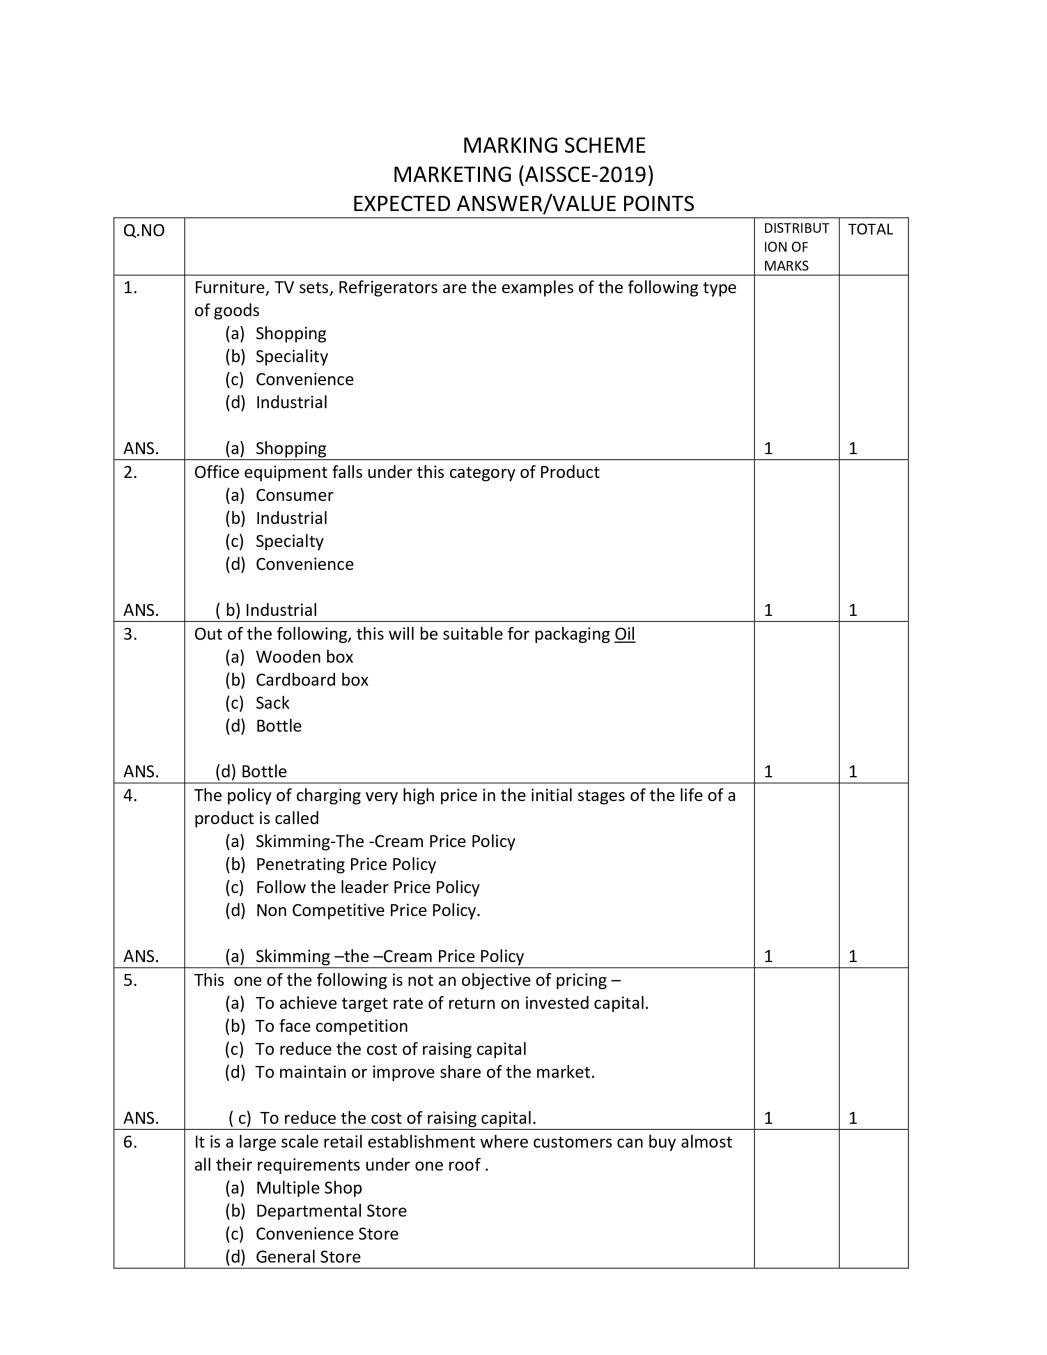 CBSE Class 12 Marketing Question Paper 2019 Solutions - Page 1